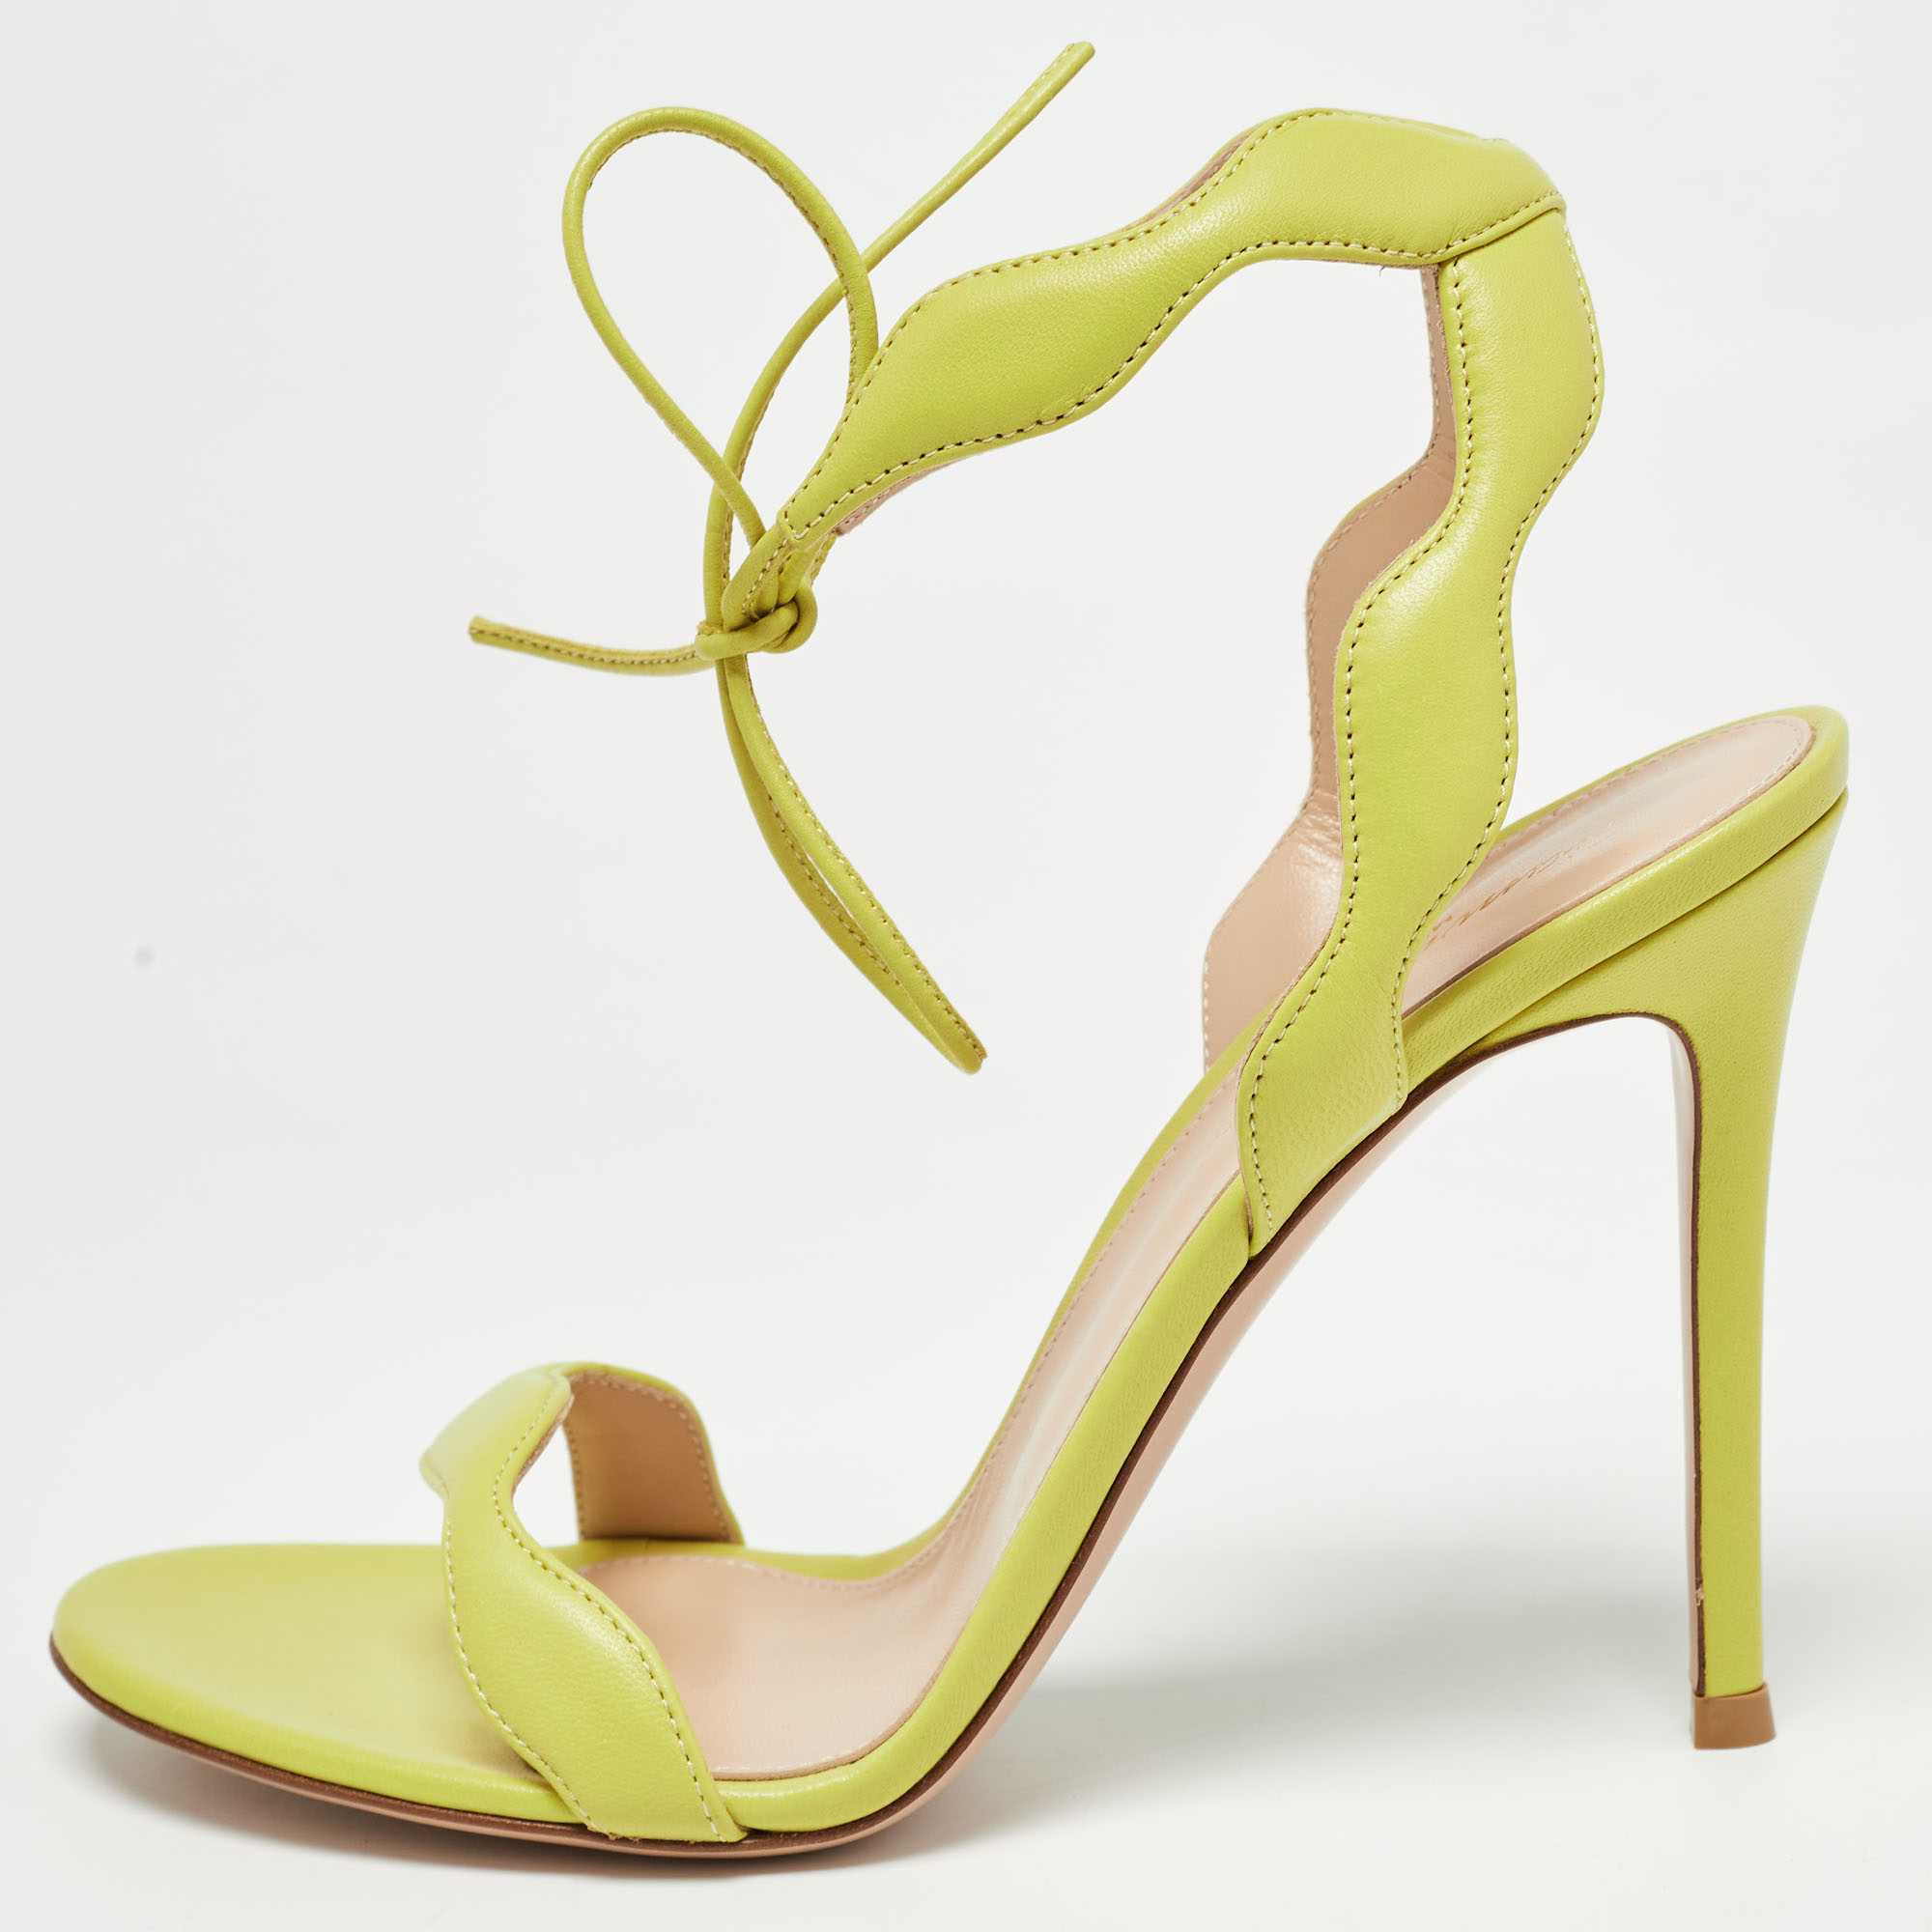 Gianvito rossi yellow leather wavy ankle tie sandals size 37